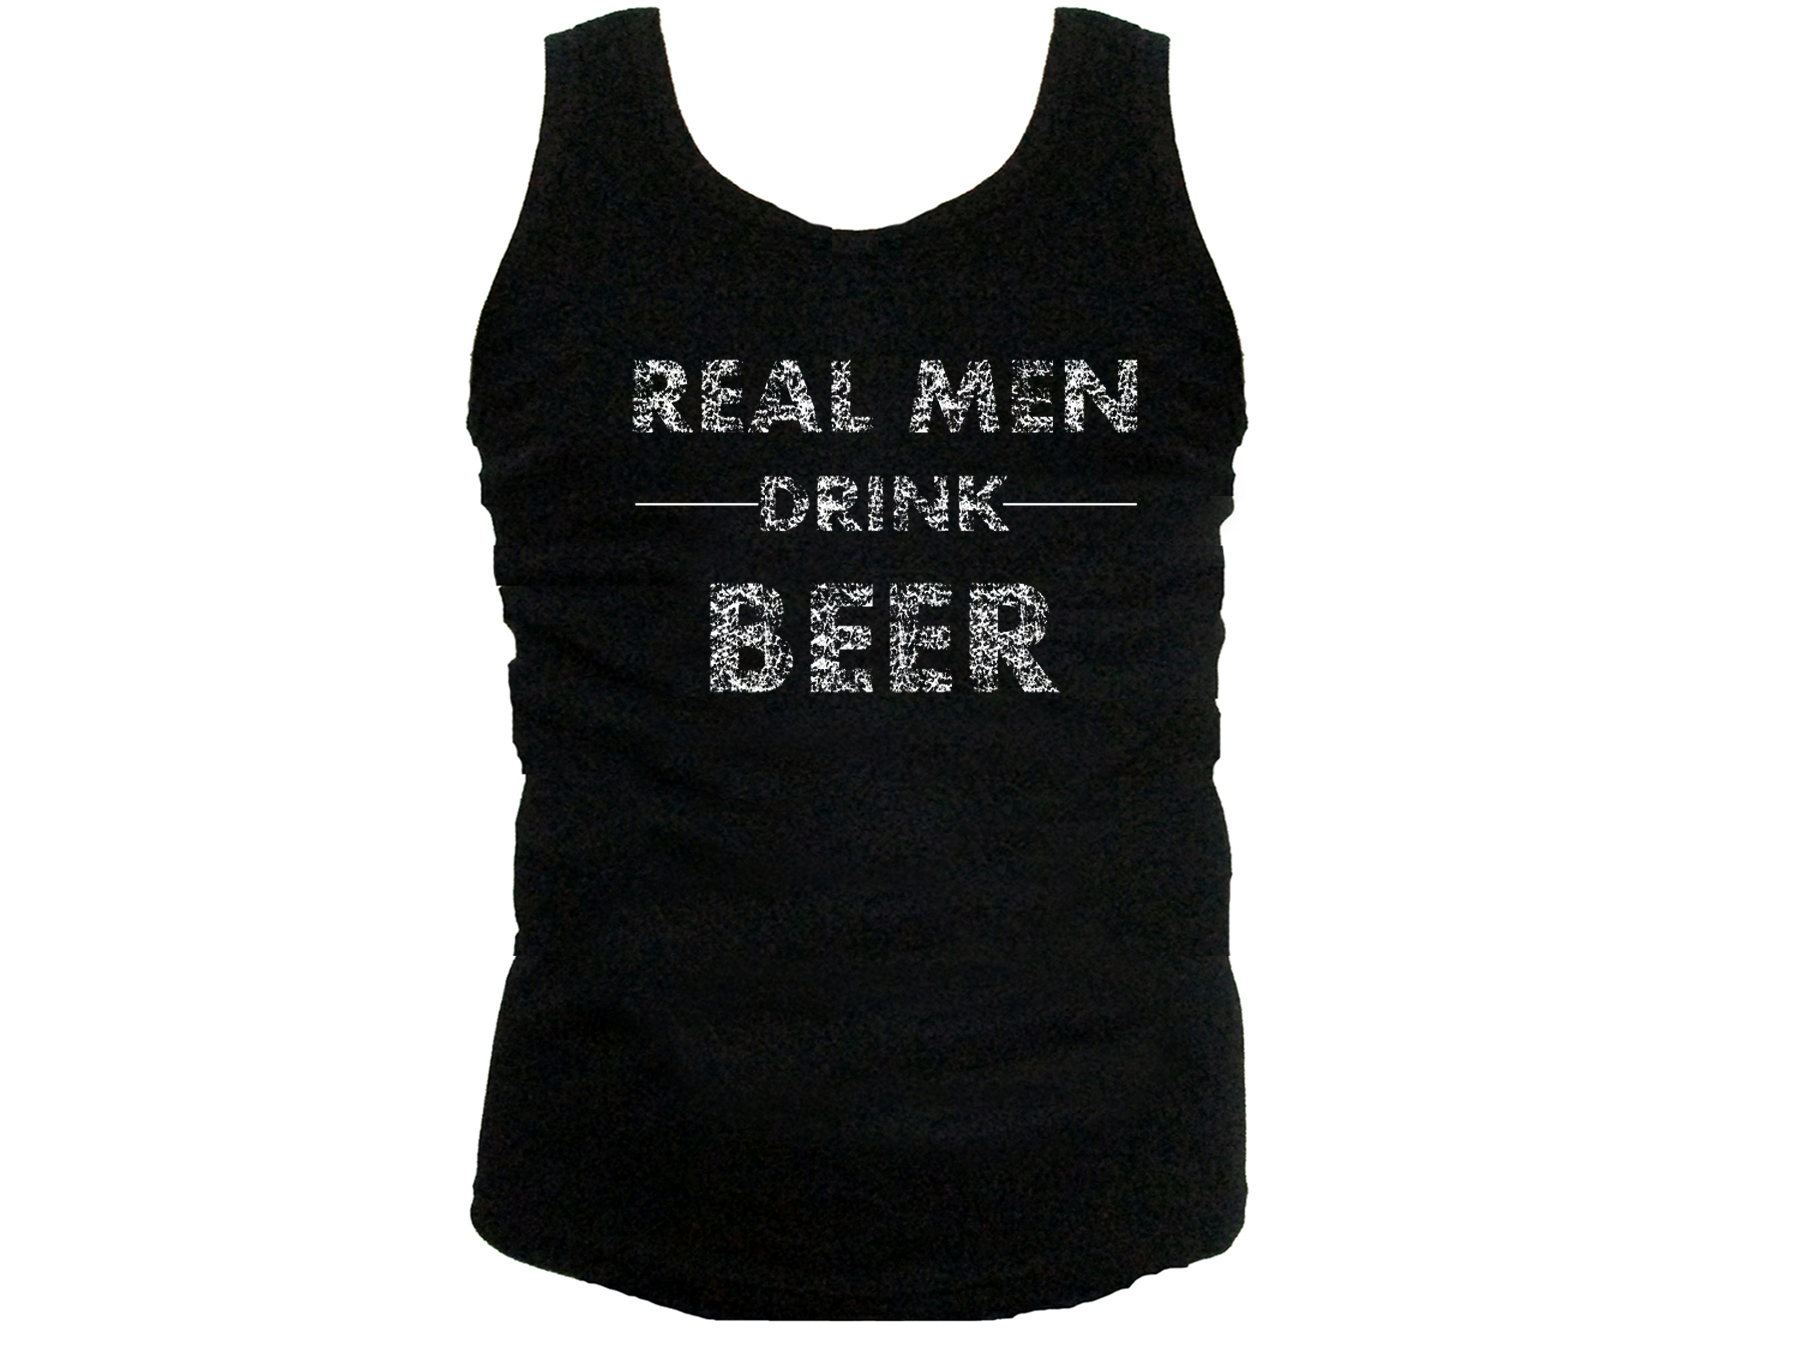 Real men drink beer funny drinking cheap distressed look tank top 2XL